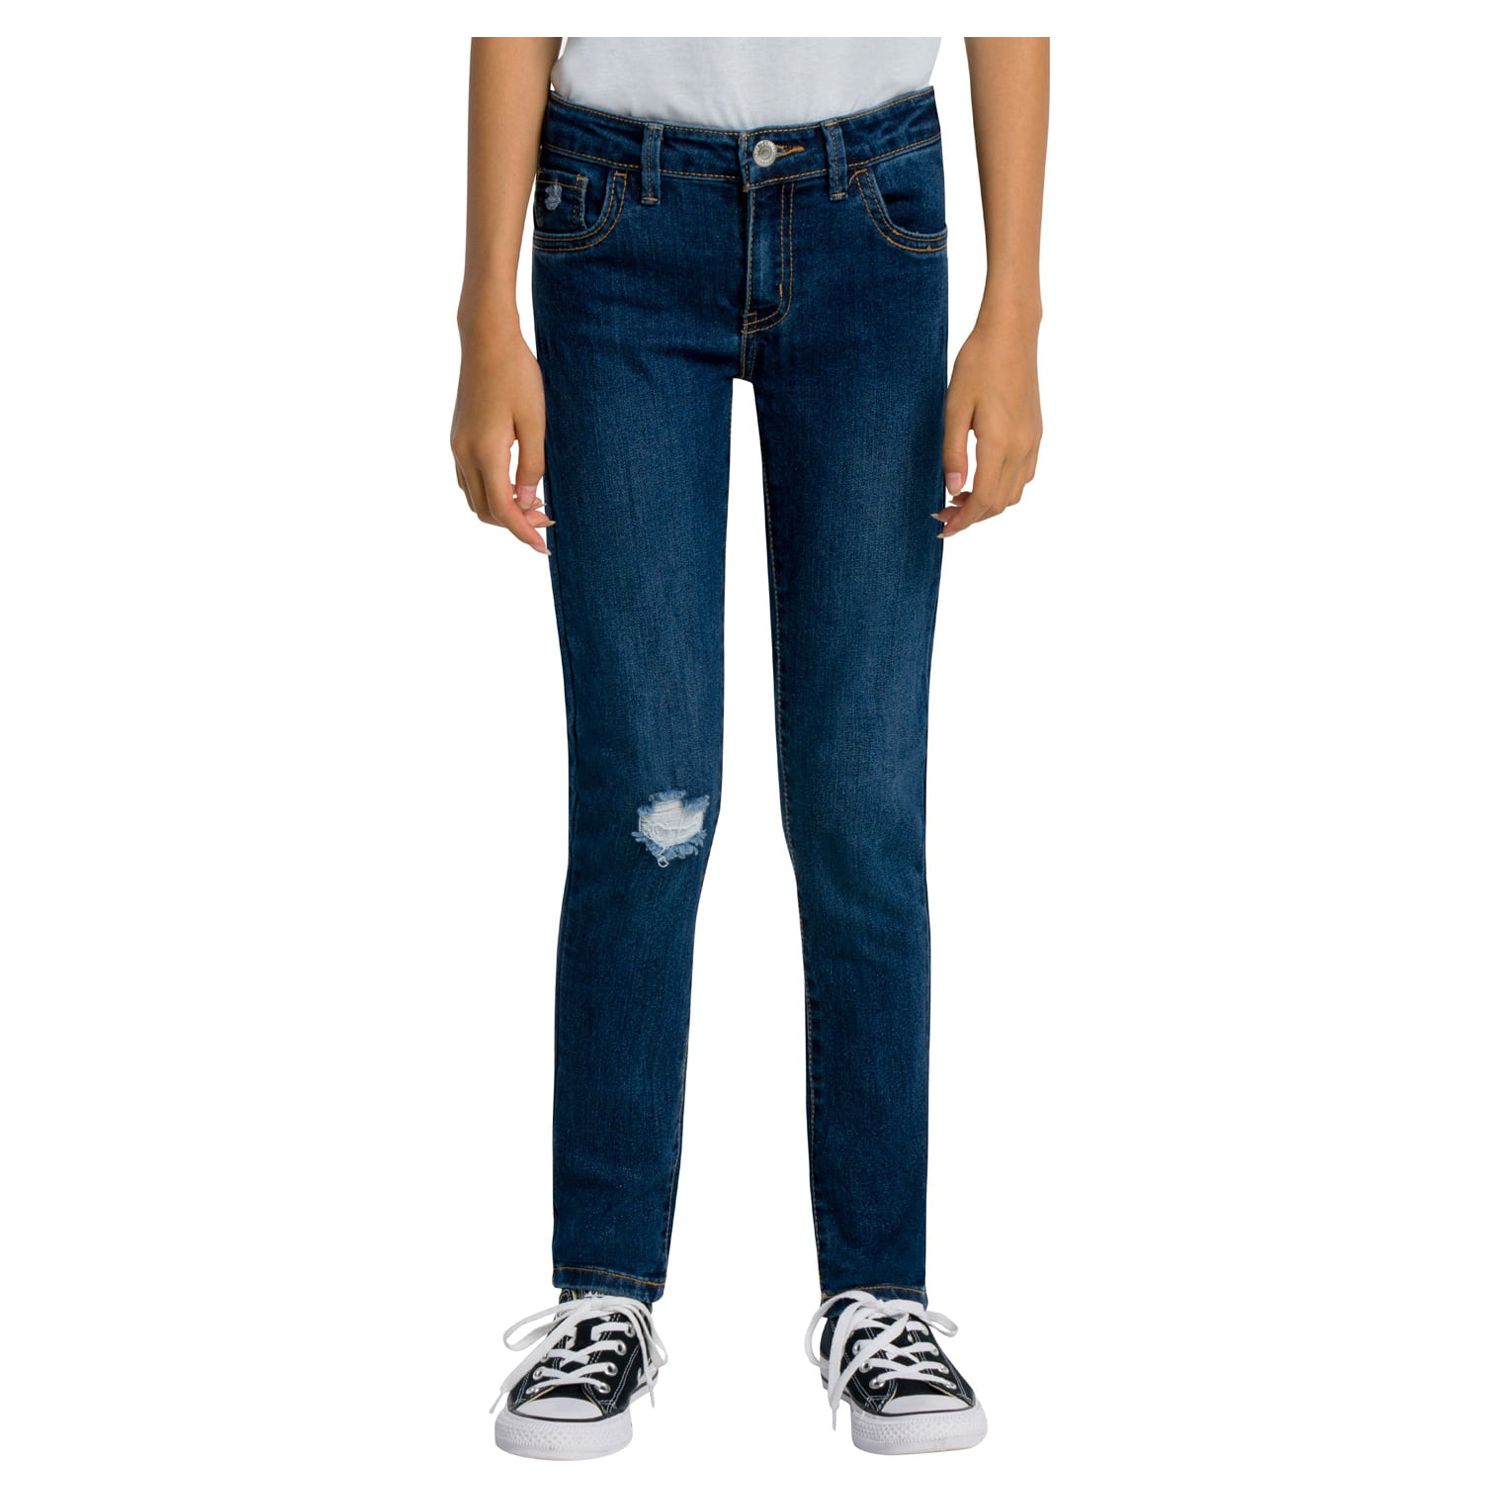 Levi's Girls' 710 Super Skinny Fit Jeans, Sizes 4-16 - image 3 of 6